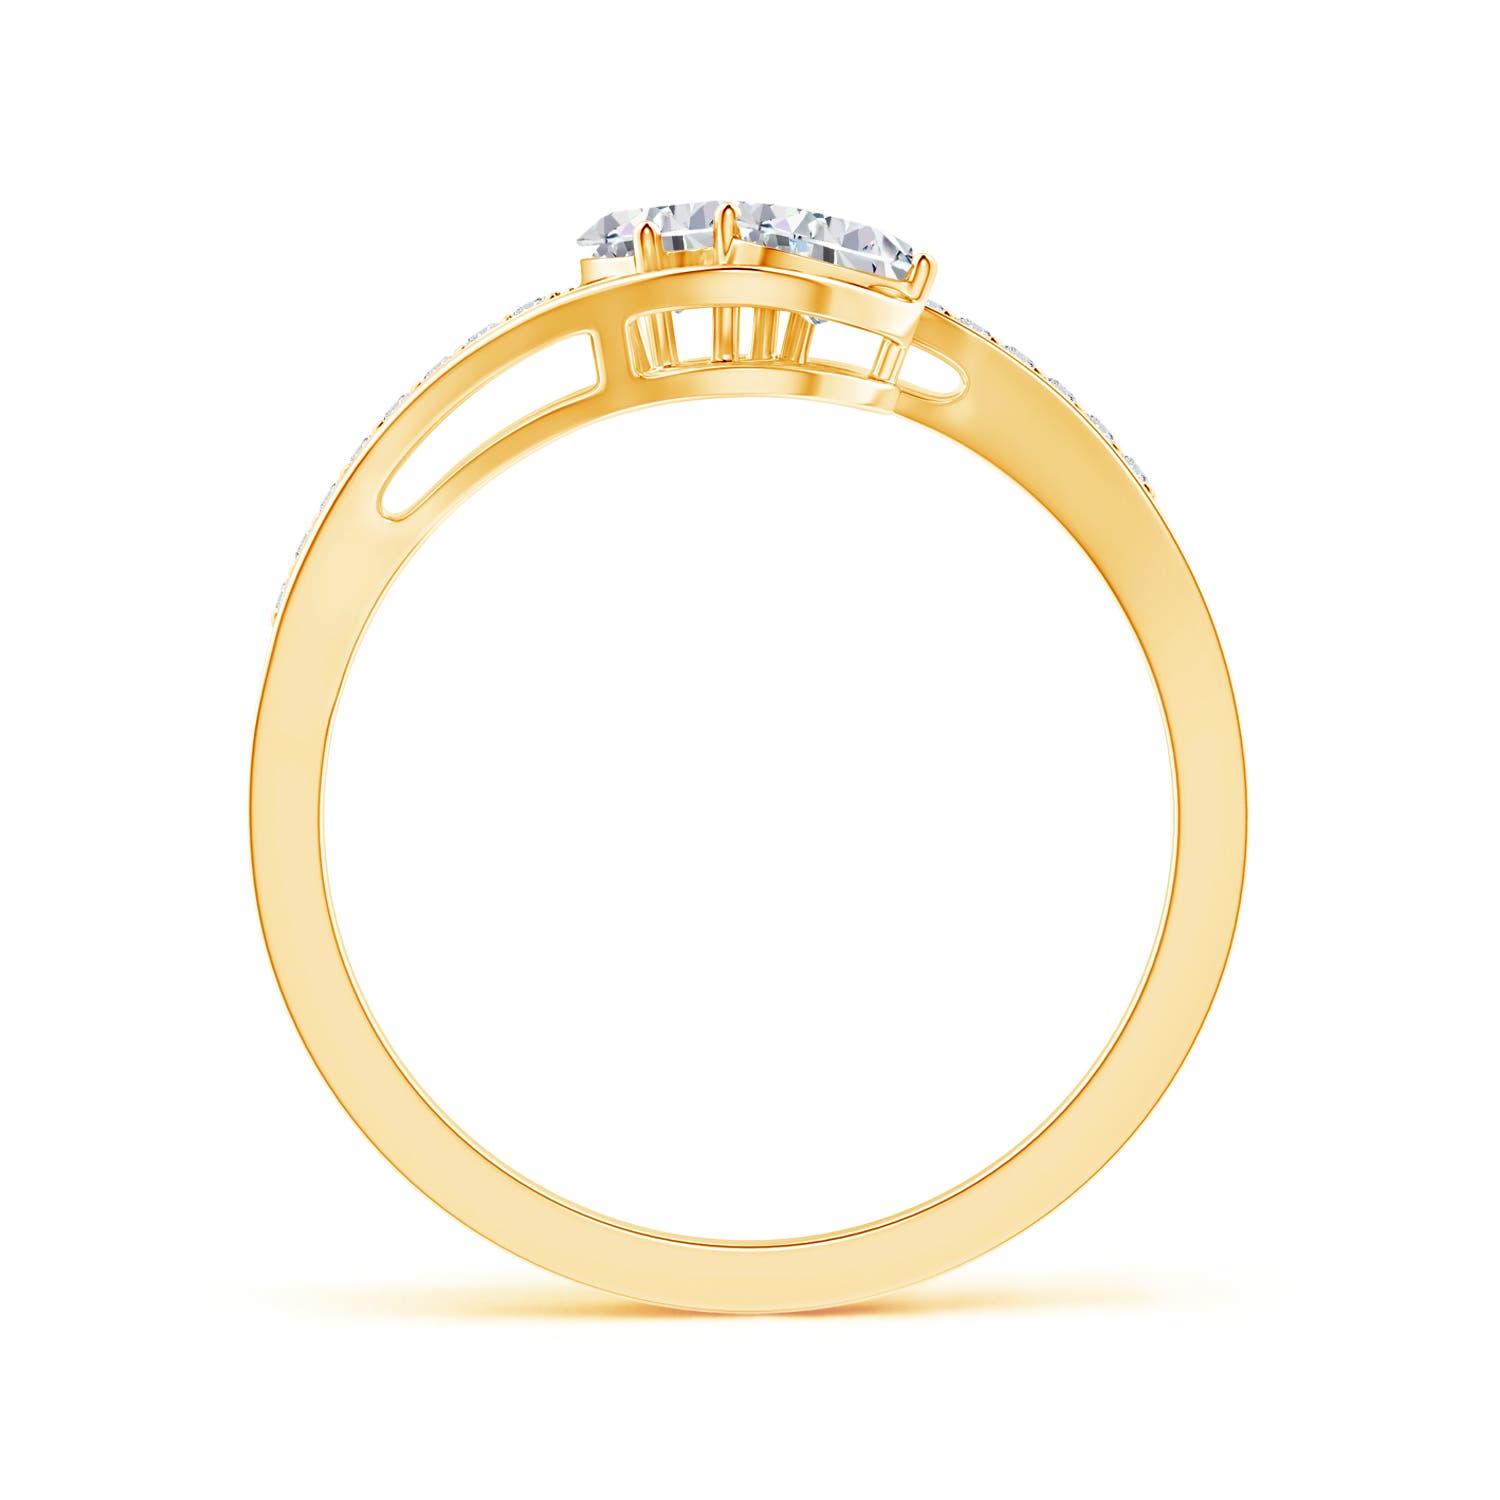 H, SI2 / 0.45 CT / 14 KT Yellow Gold